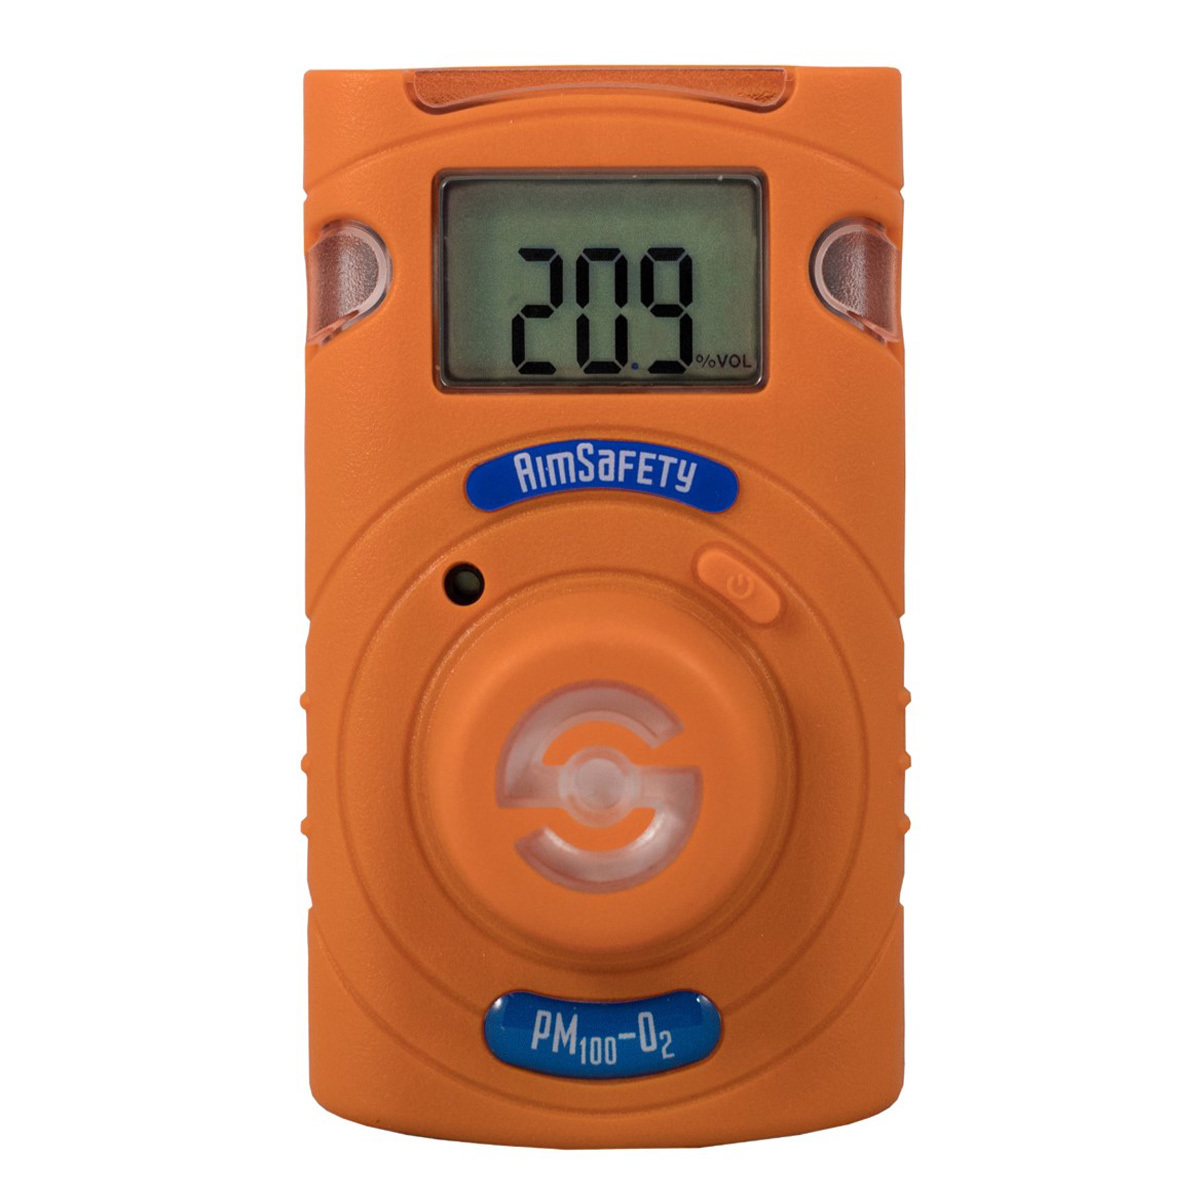 Macurco™ AimSafety PM100-O2 Portable Oxygen Detector